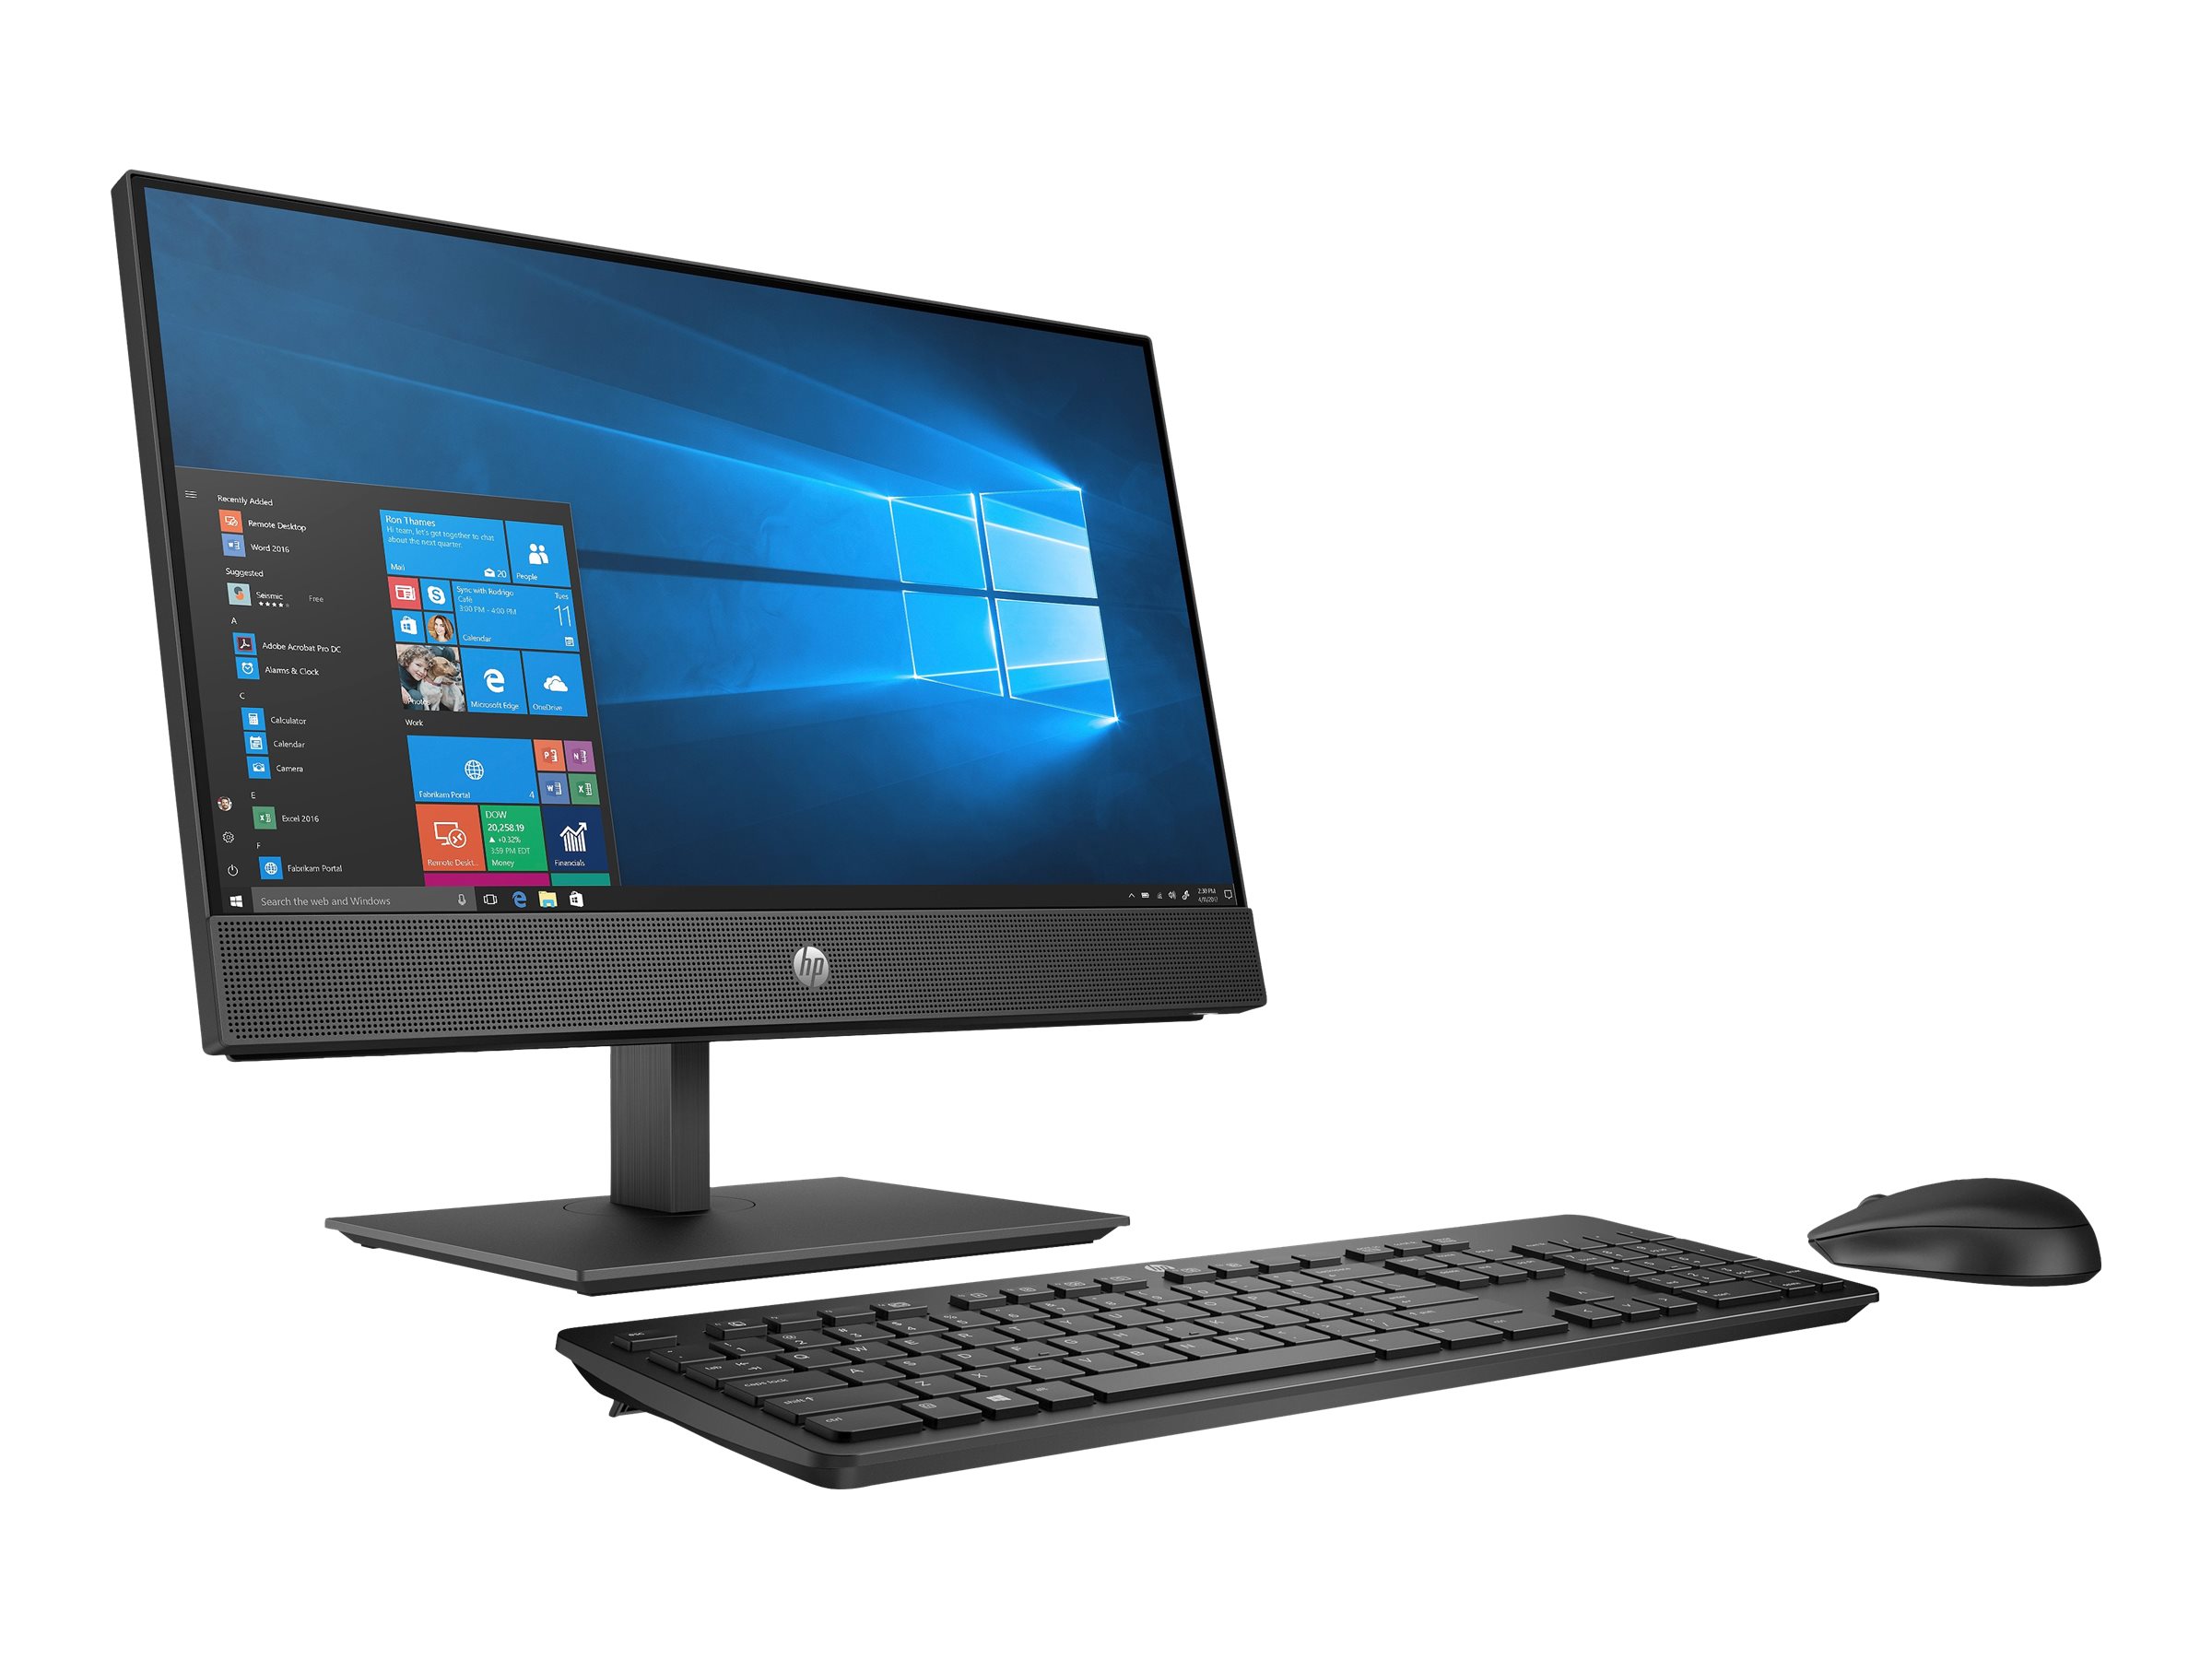 HP ProOne 600 G4 - All-in-one | www.shi.com